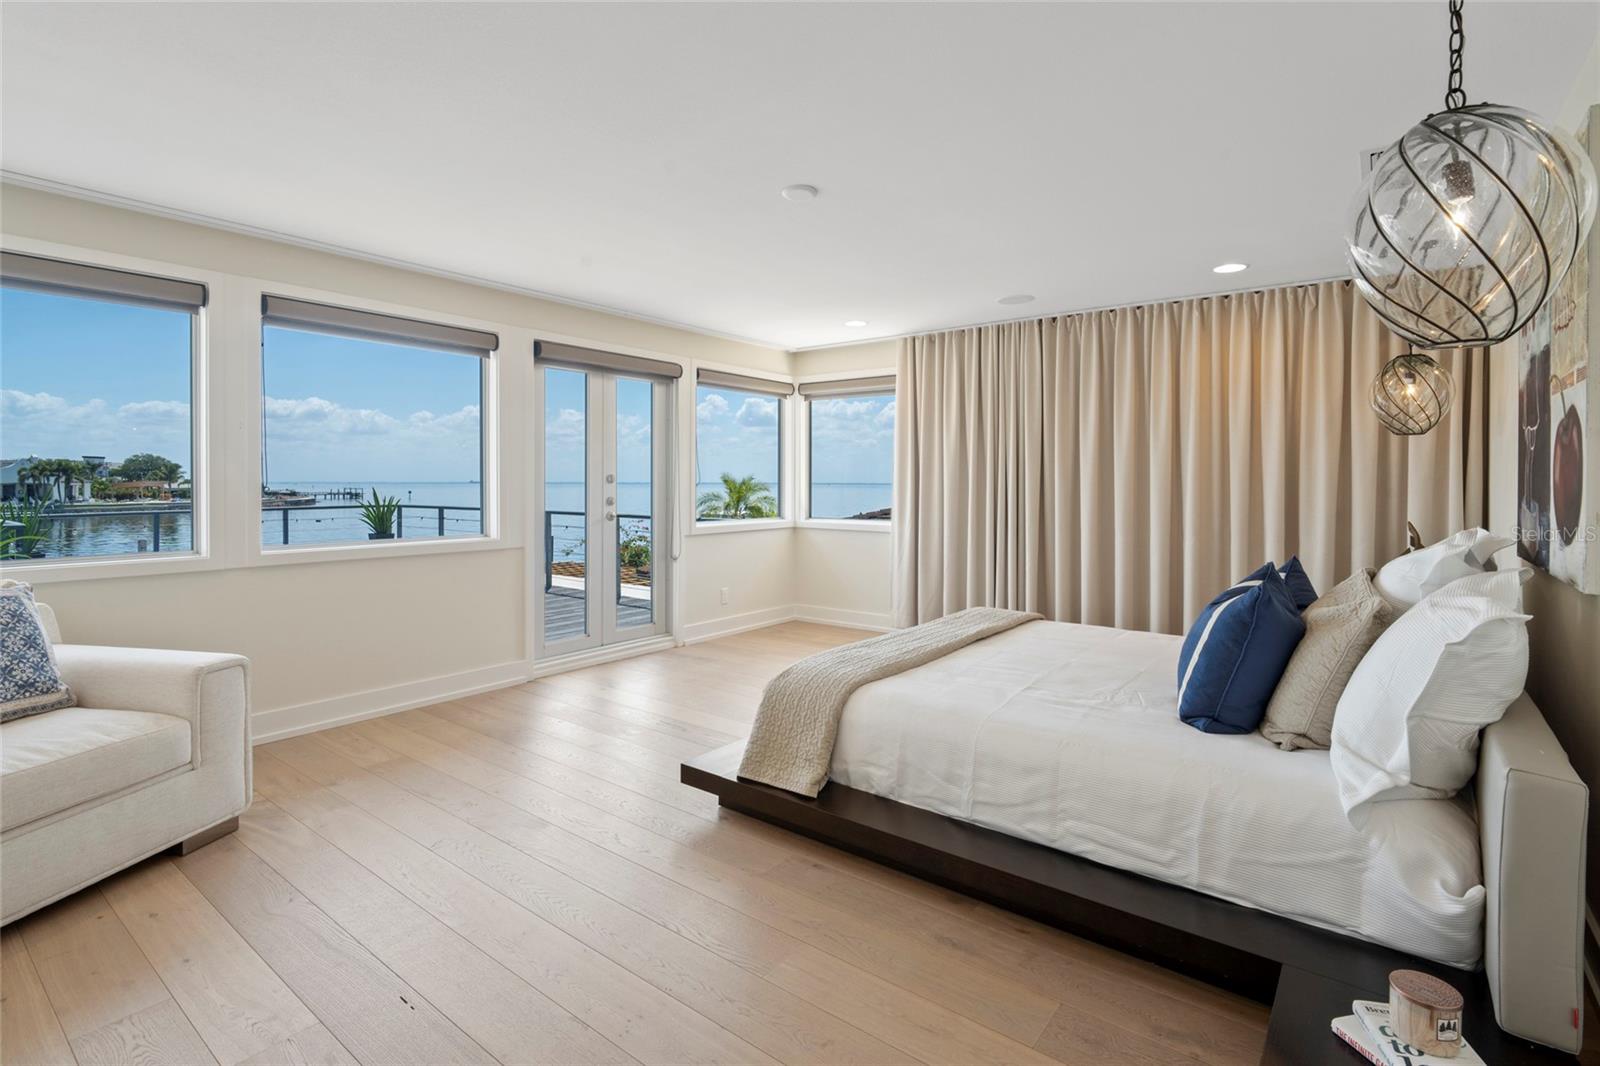 Downstairs bedroom with waterview